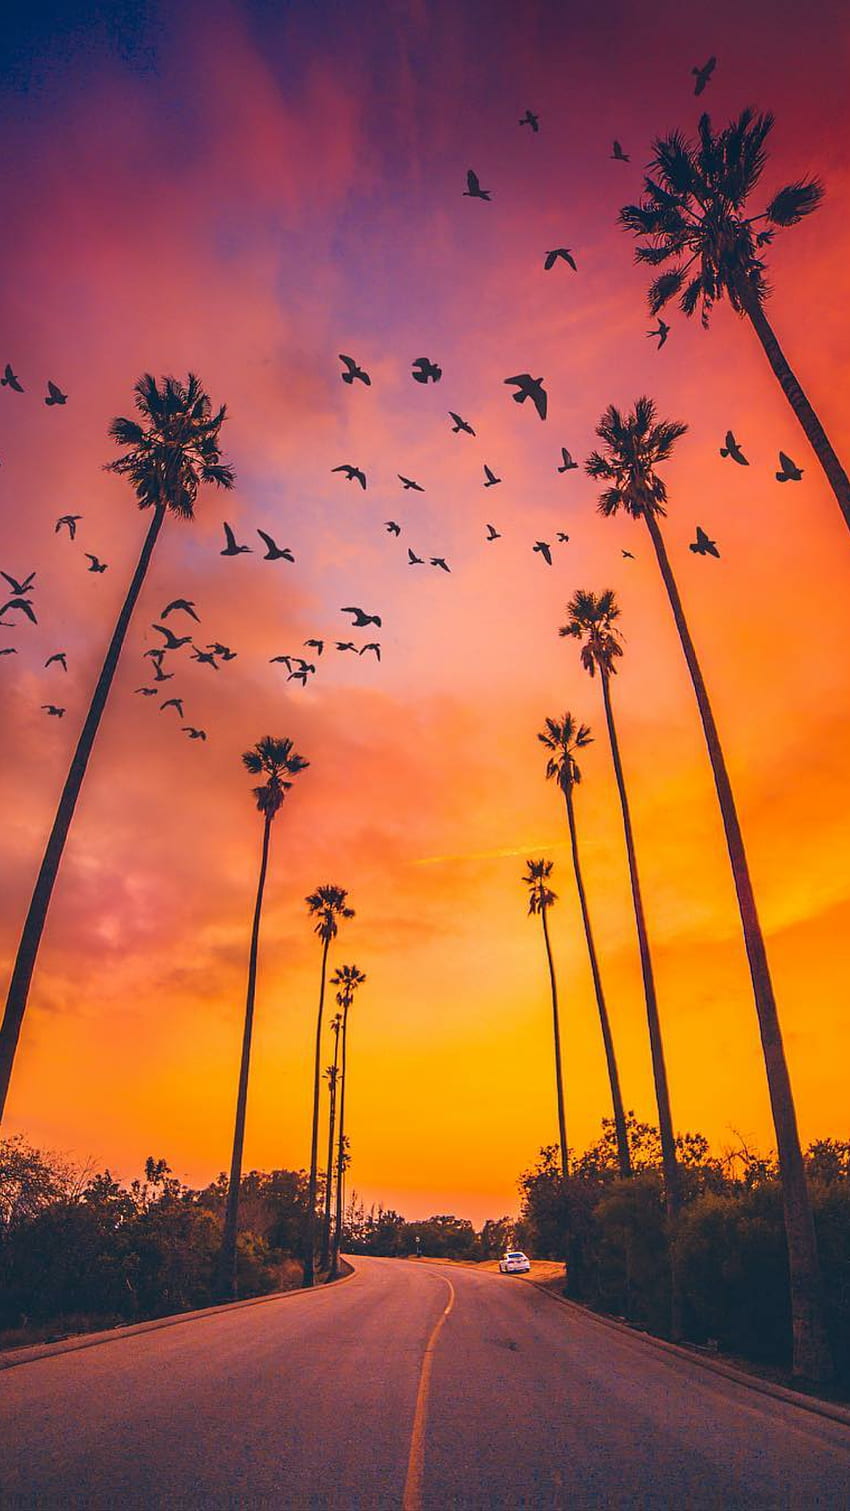 Live life with no excuses travel with no regret  California sunset palm  trees h California sunset California sunset aesthetic California HD  phone wallpaper  Pxfuel